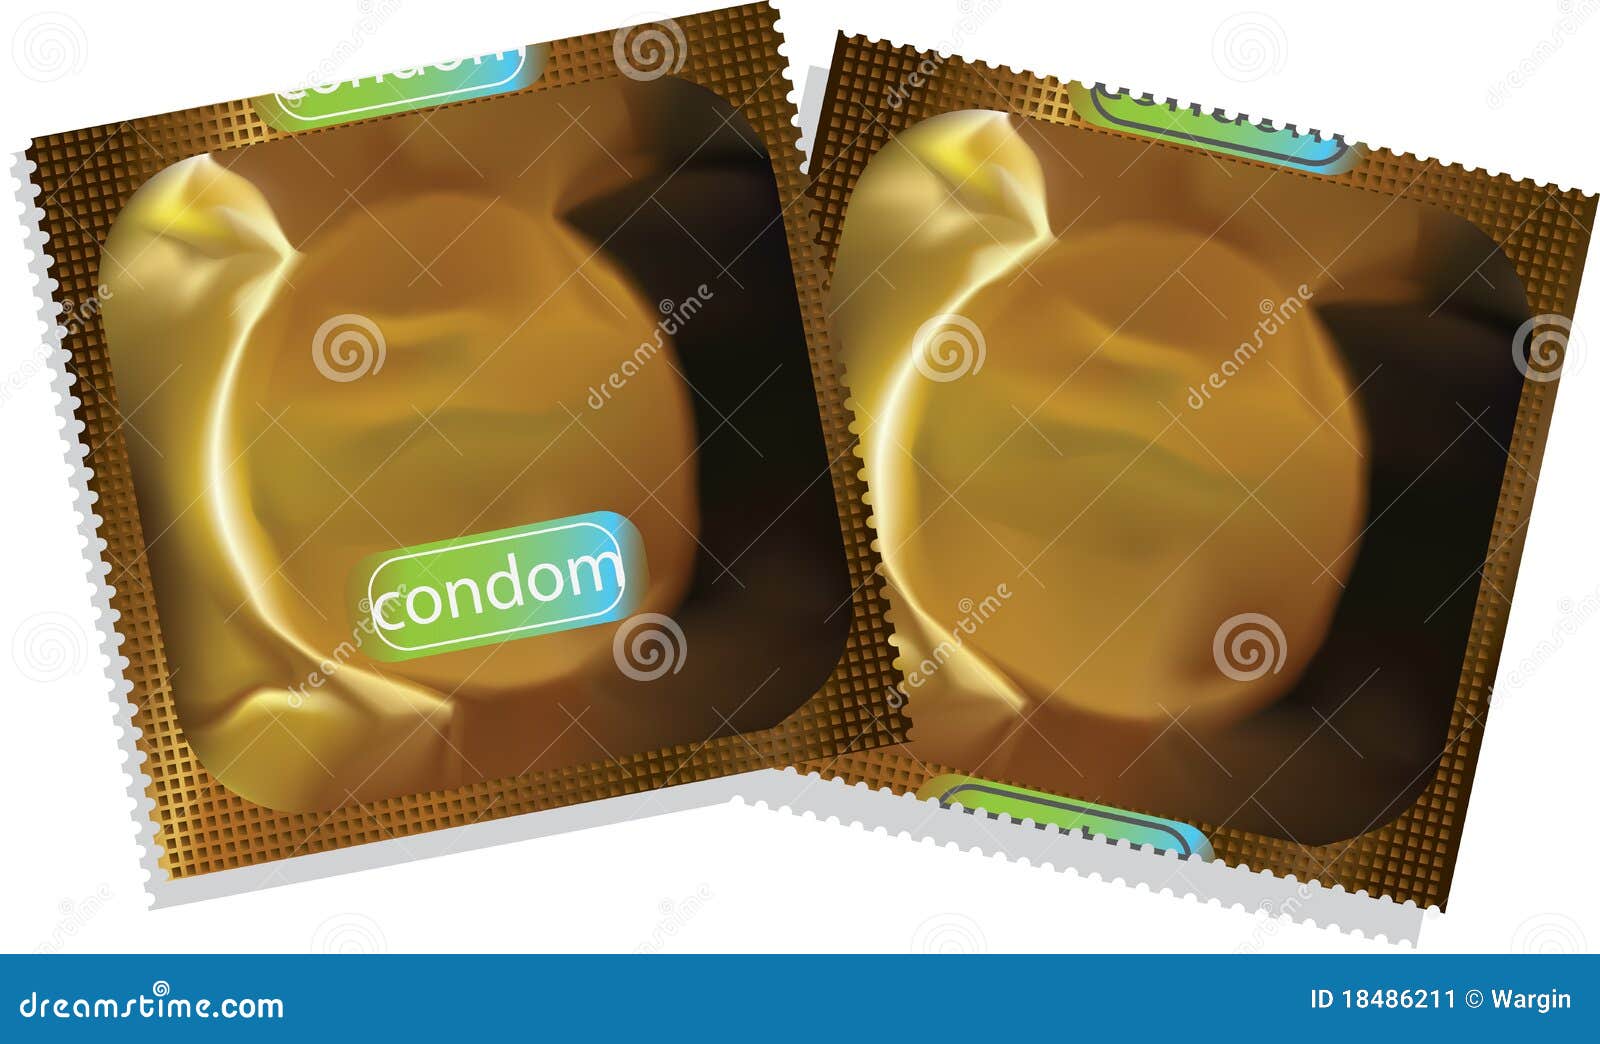 gold condom packet.